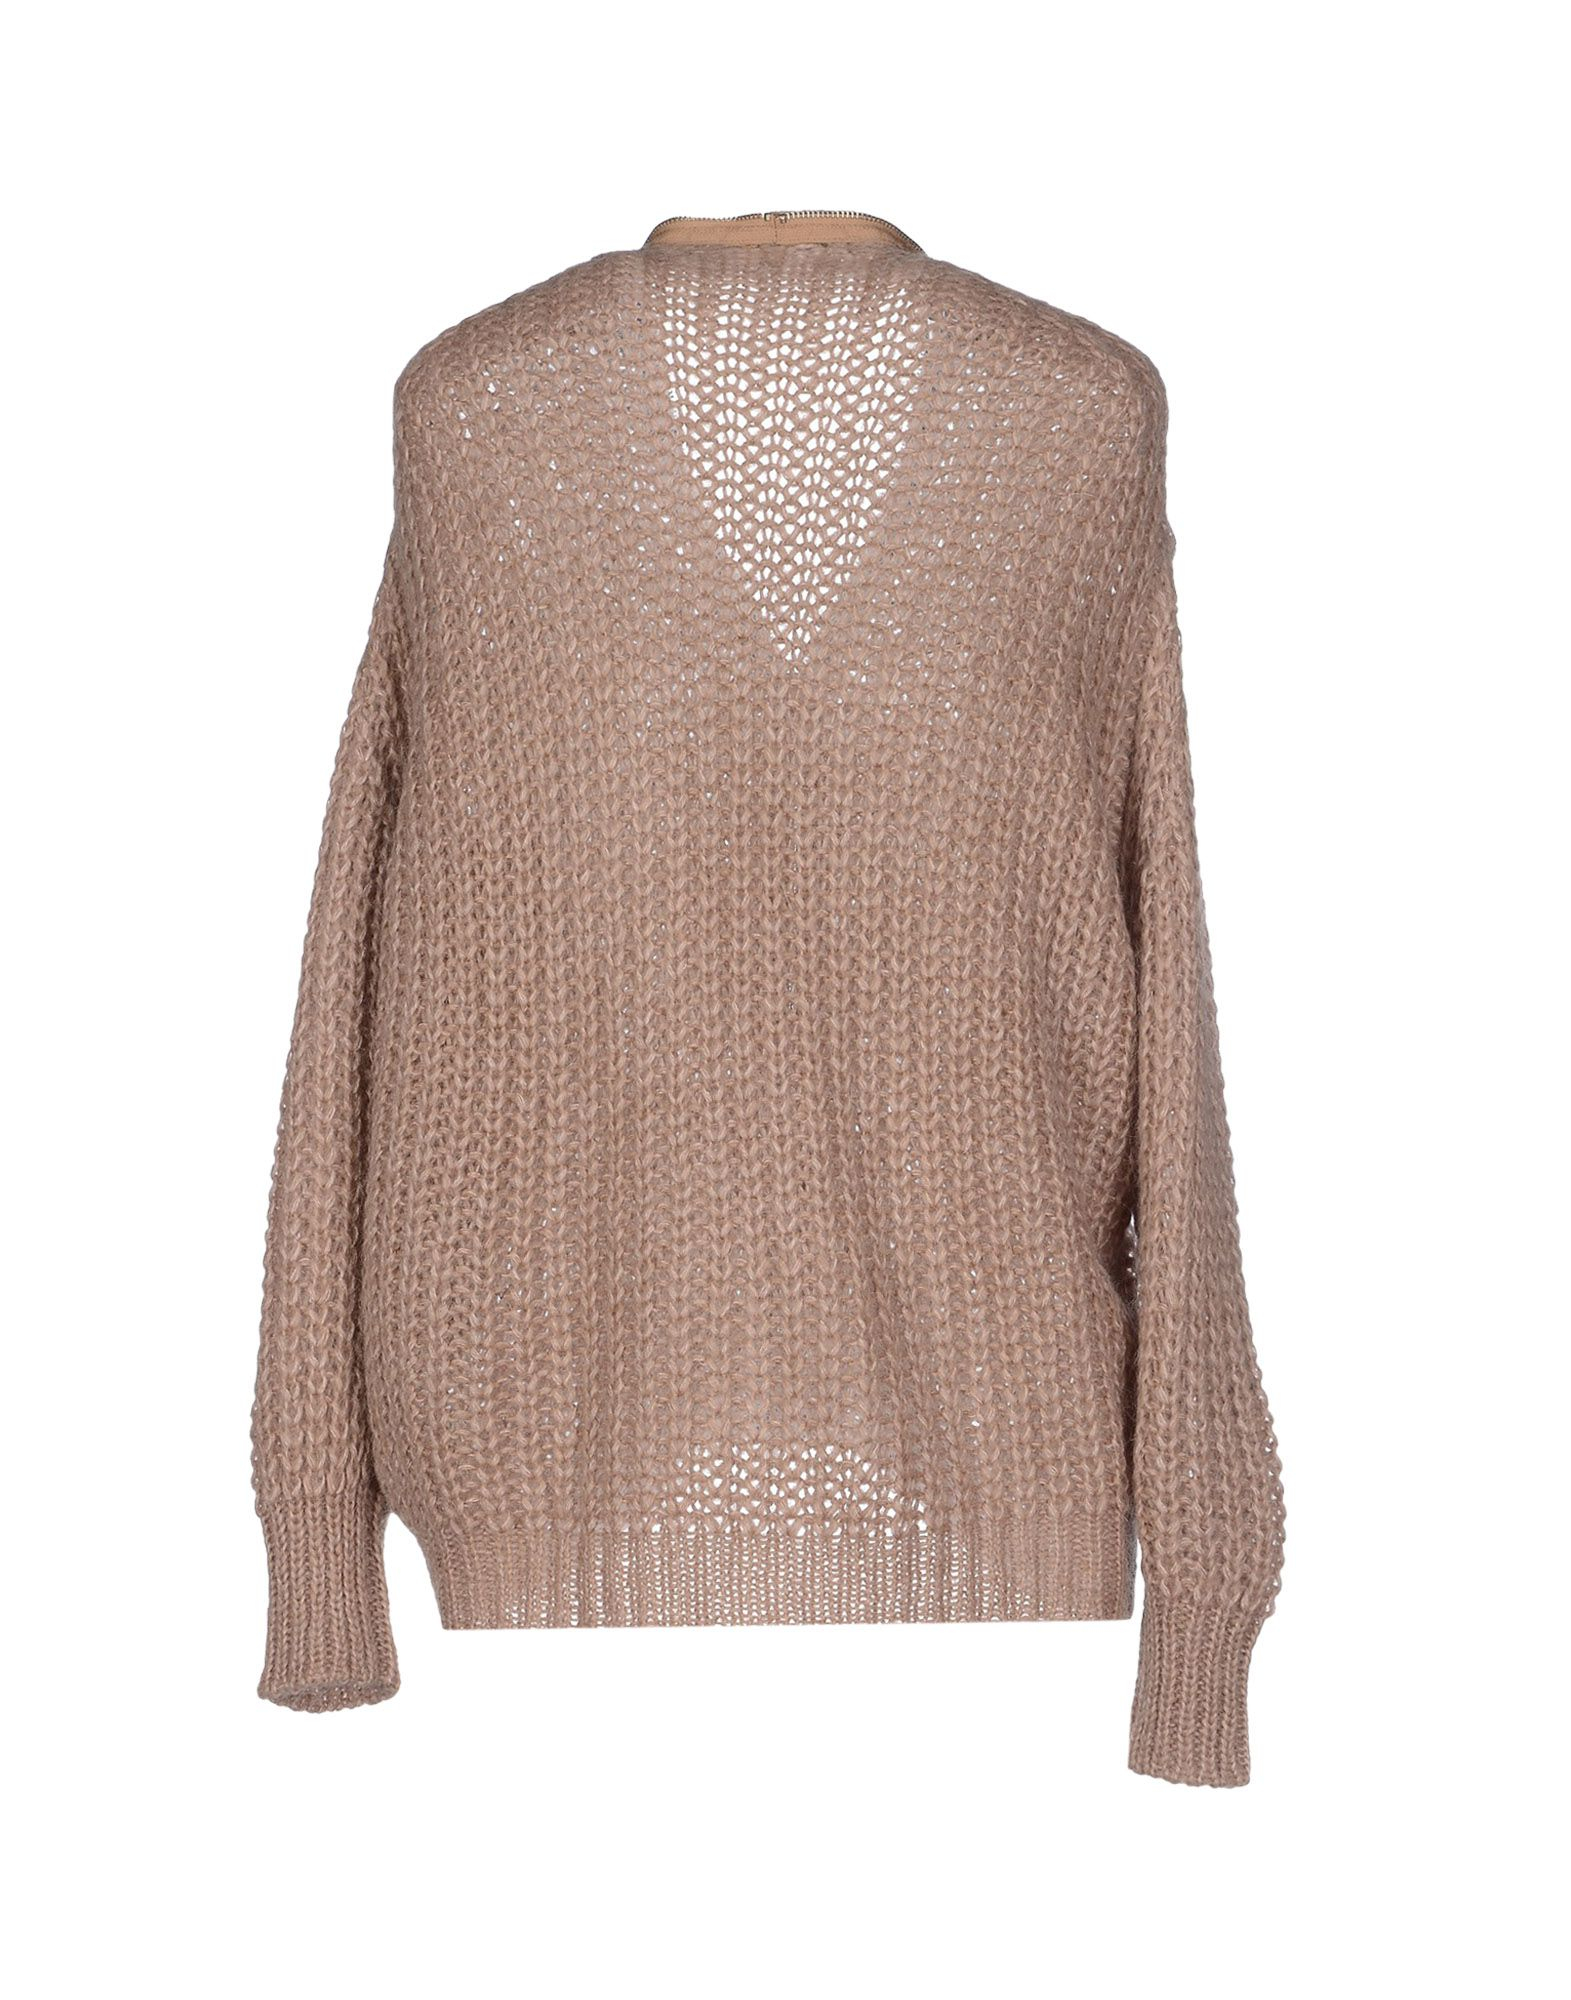 Stefanel Synthetic Cardigan in Light Brown (Brown) - Lyst